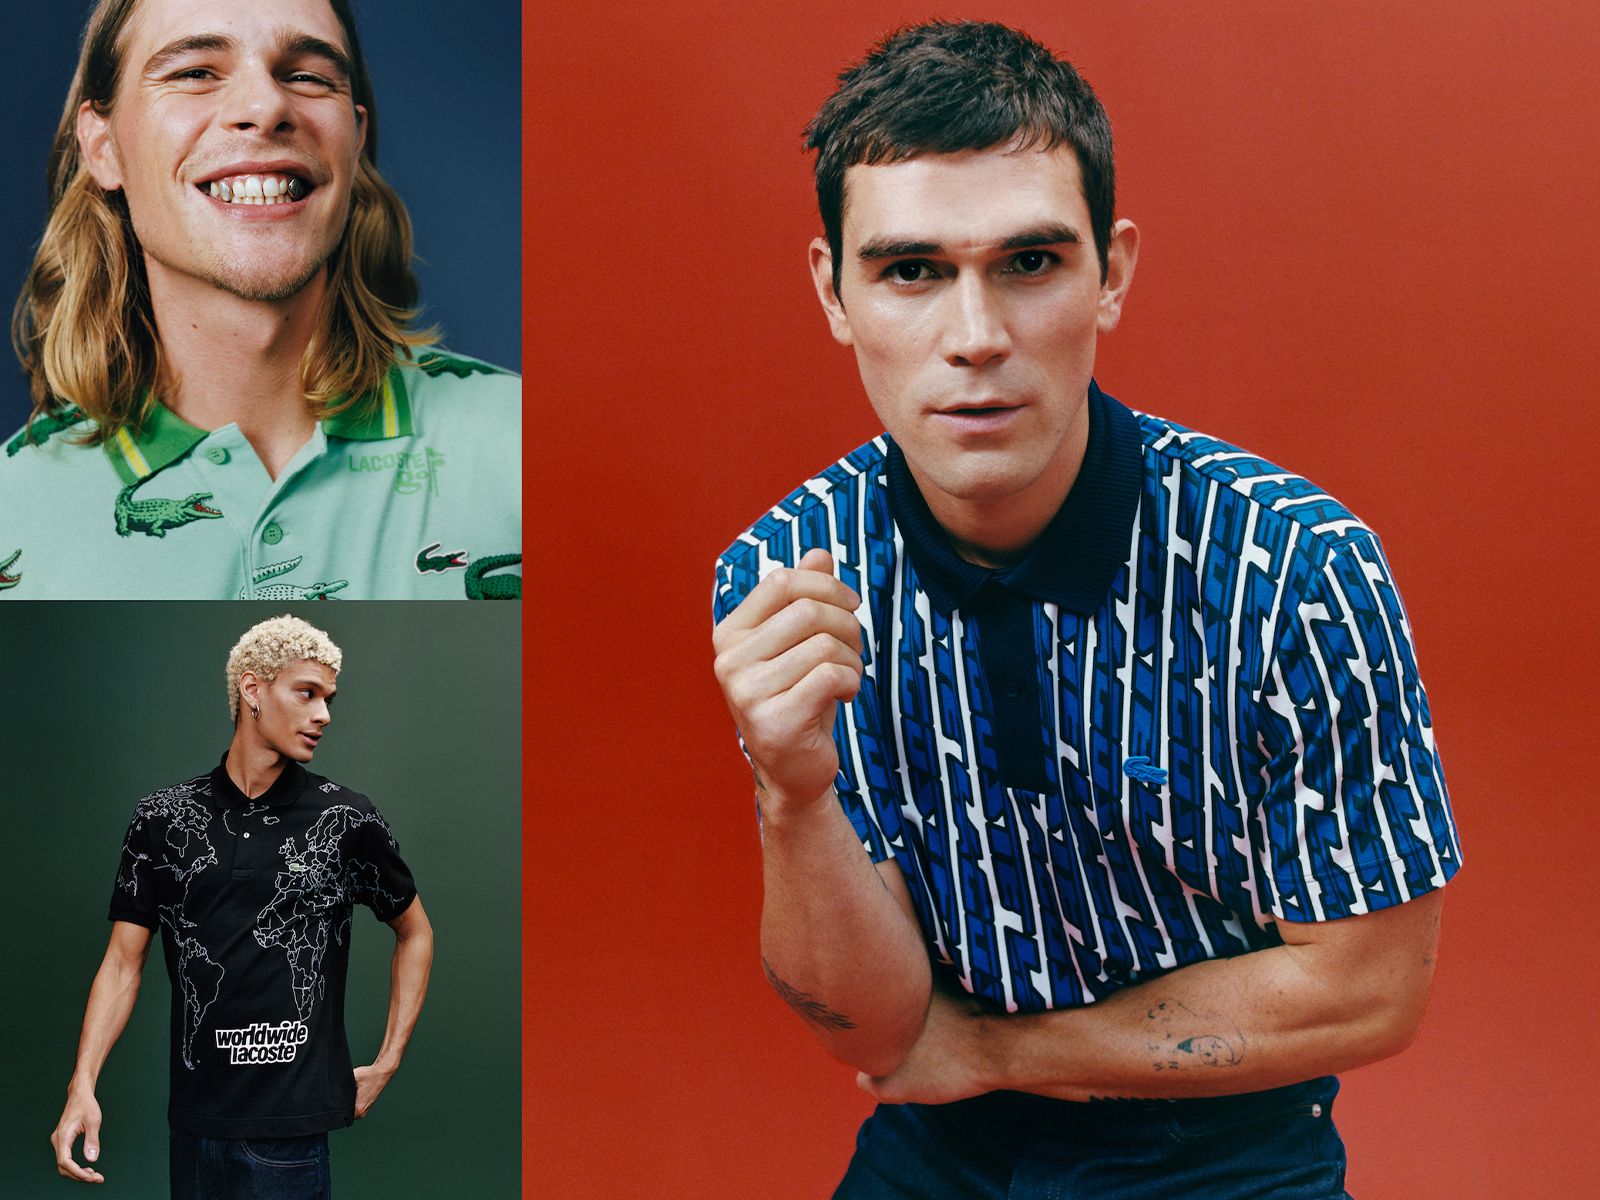 The importance of the Lacoste polo shirt throughout its history